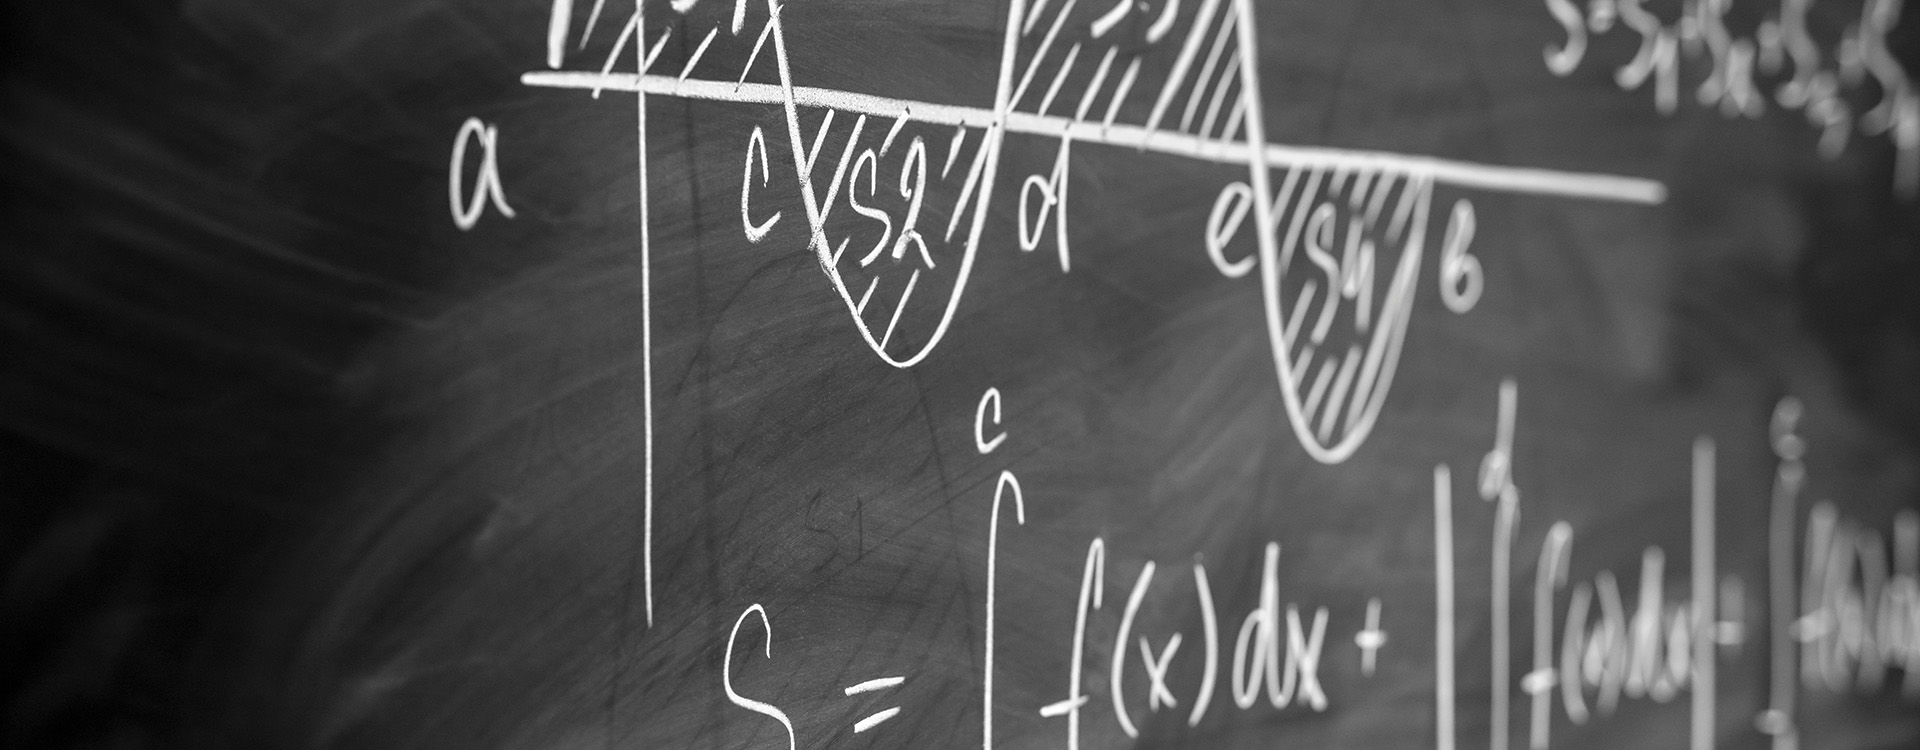 Blackboard with chalk mathematical equations